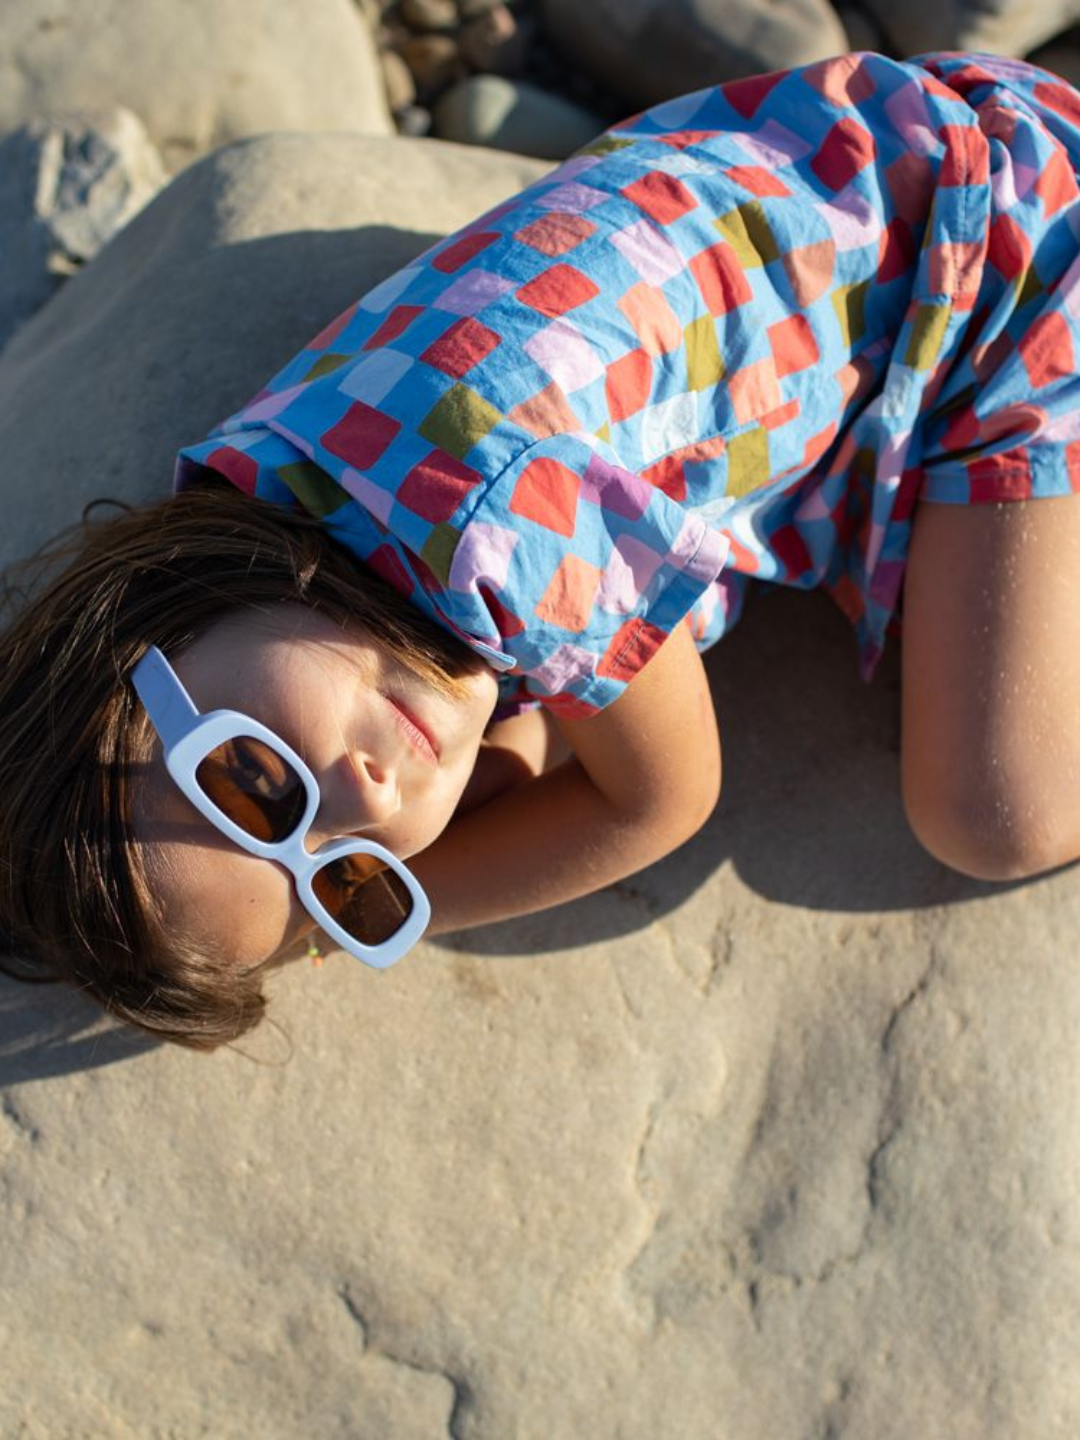 Blue | A child lying on a rock wearing a kids' shirt and shorts set in a pattern of red, orange, pink, lilac and green squares on a blue background